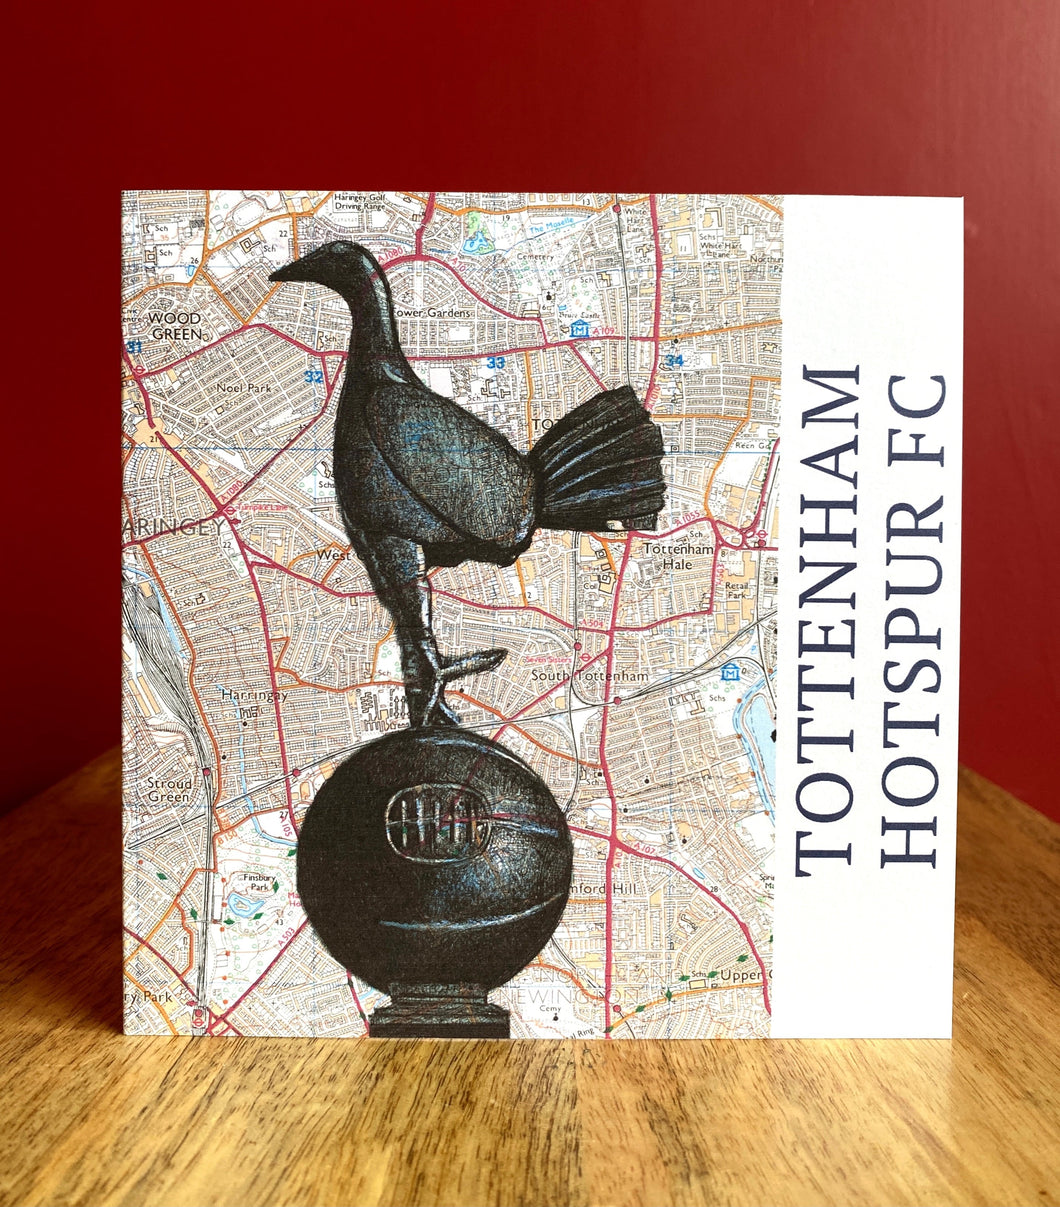 Spurs FC Inspired Greeting Card. Pen Drawing Over Map. Blank Inside